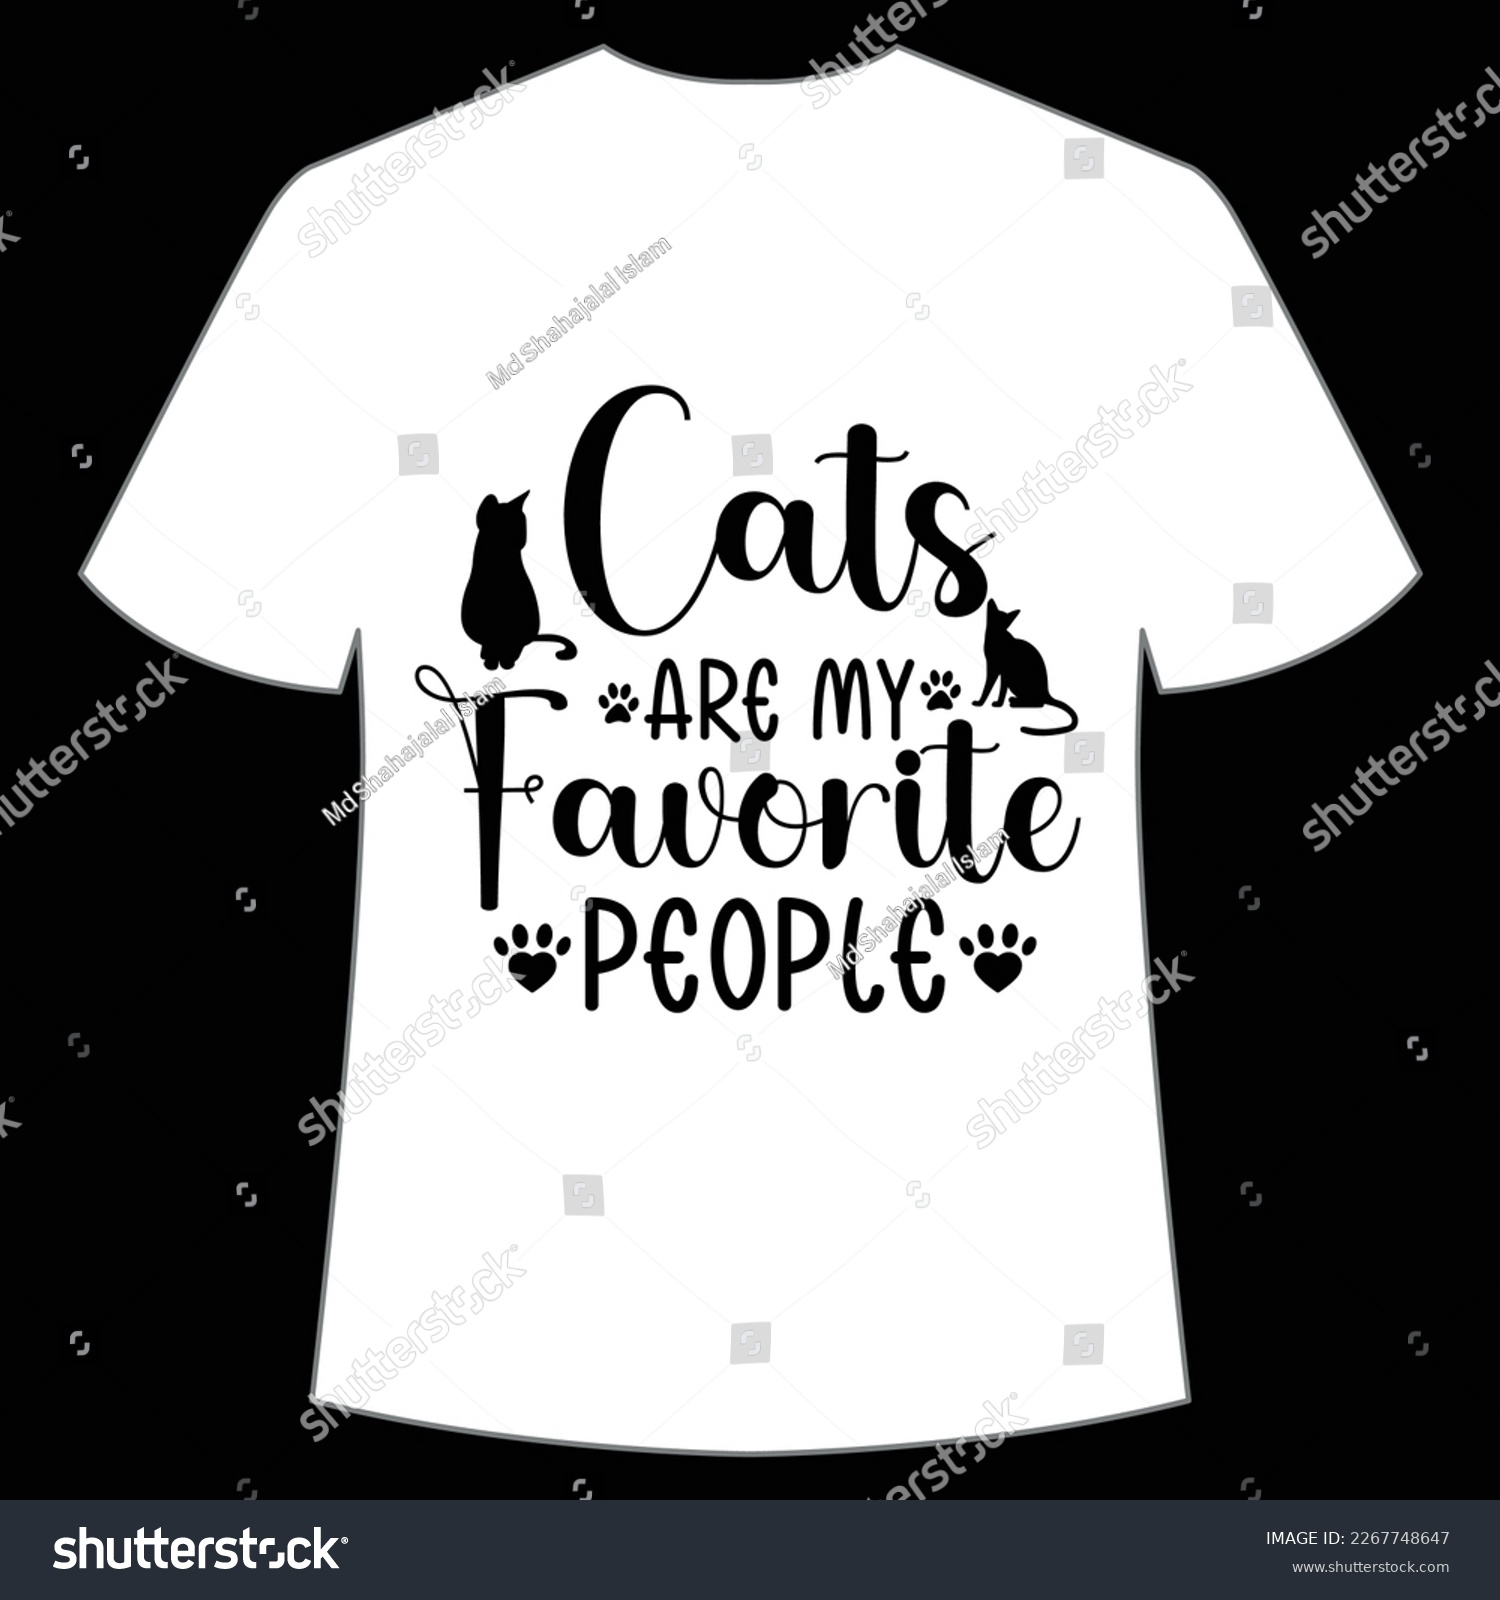 SVG of cats are my favorite people Mother's day shirt print template,  typography design for mom mommy mama daughter grandma girl women aunt mom life child best mom adorable shirt svg